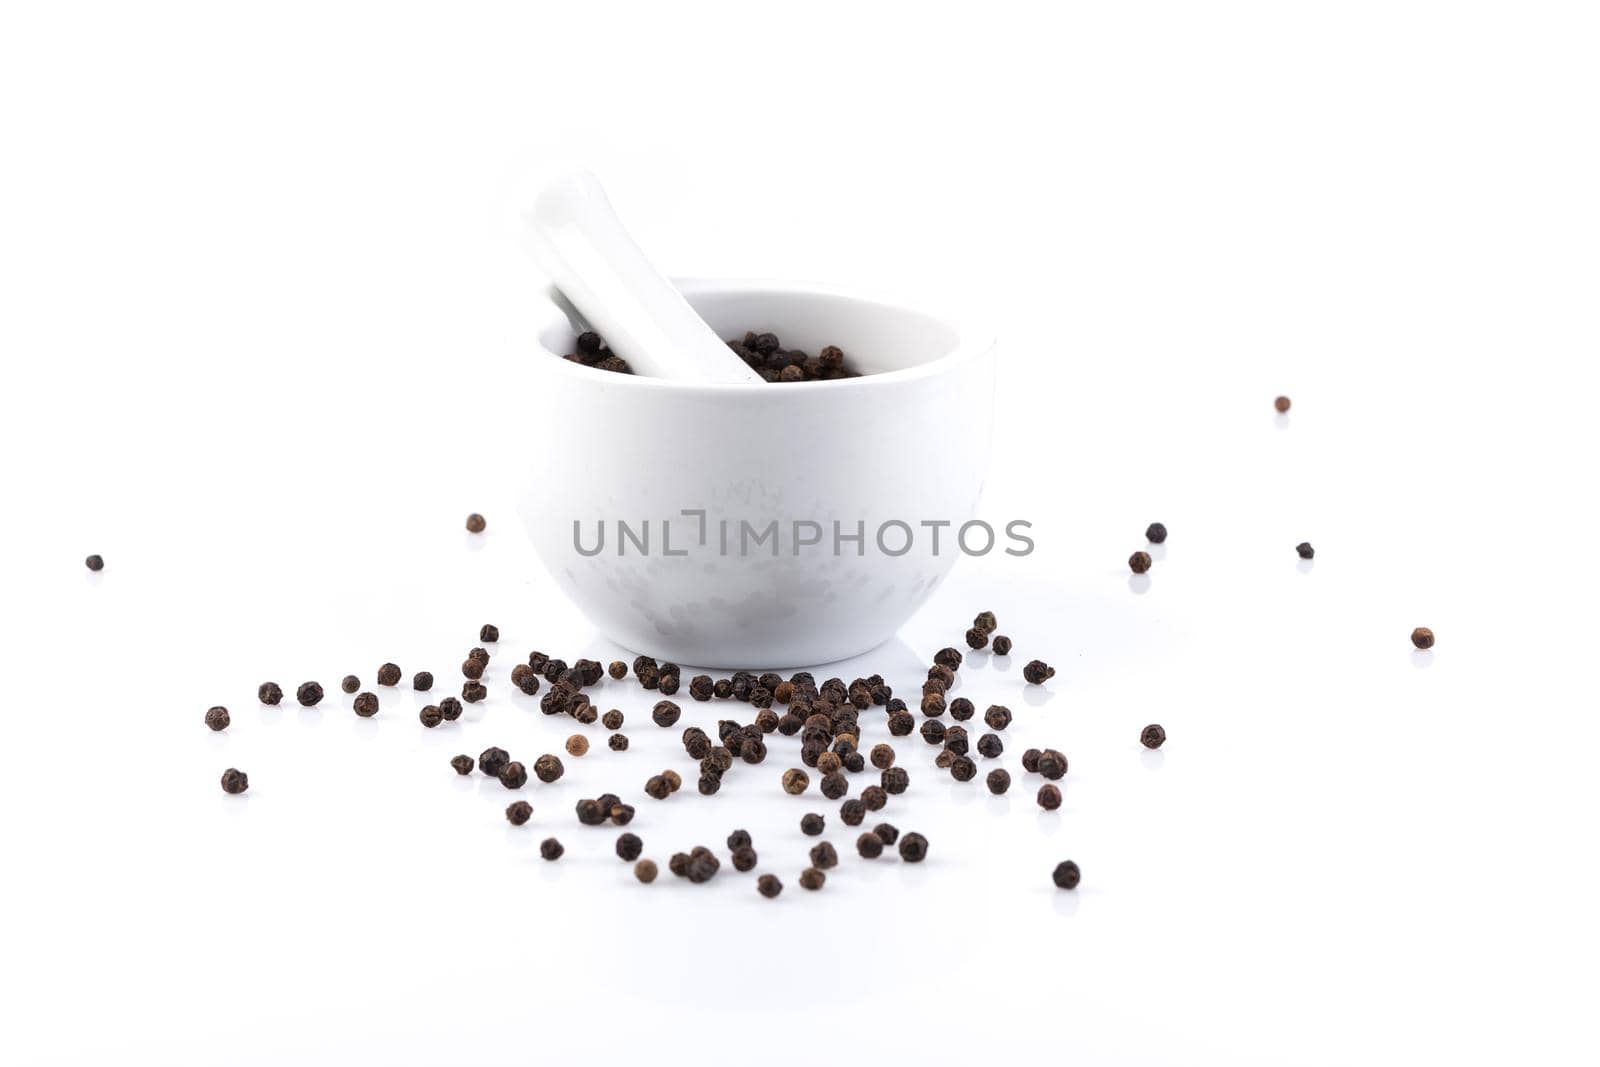 Peppercorns in mortar and pestle by RTsubin